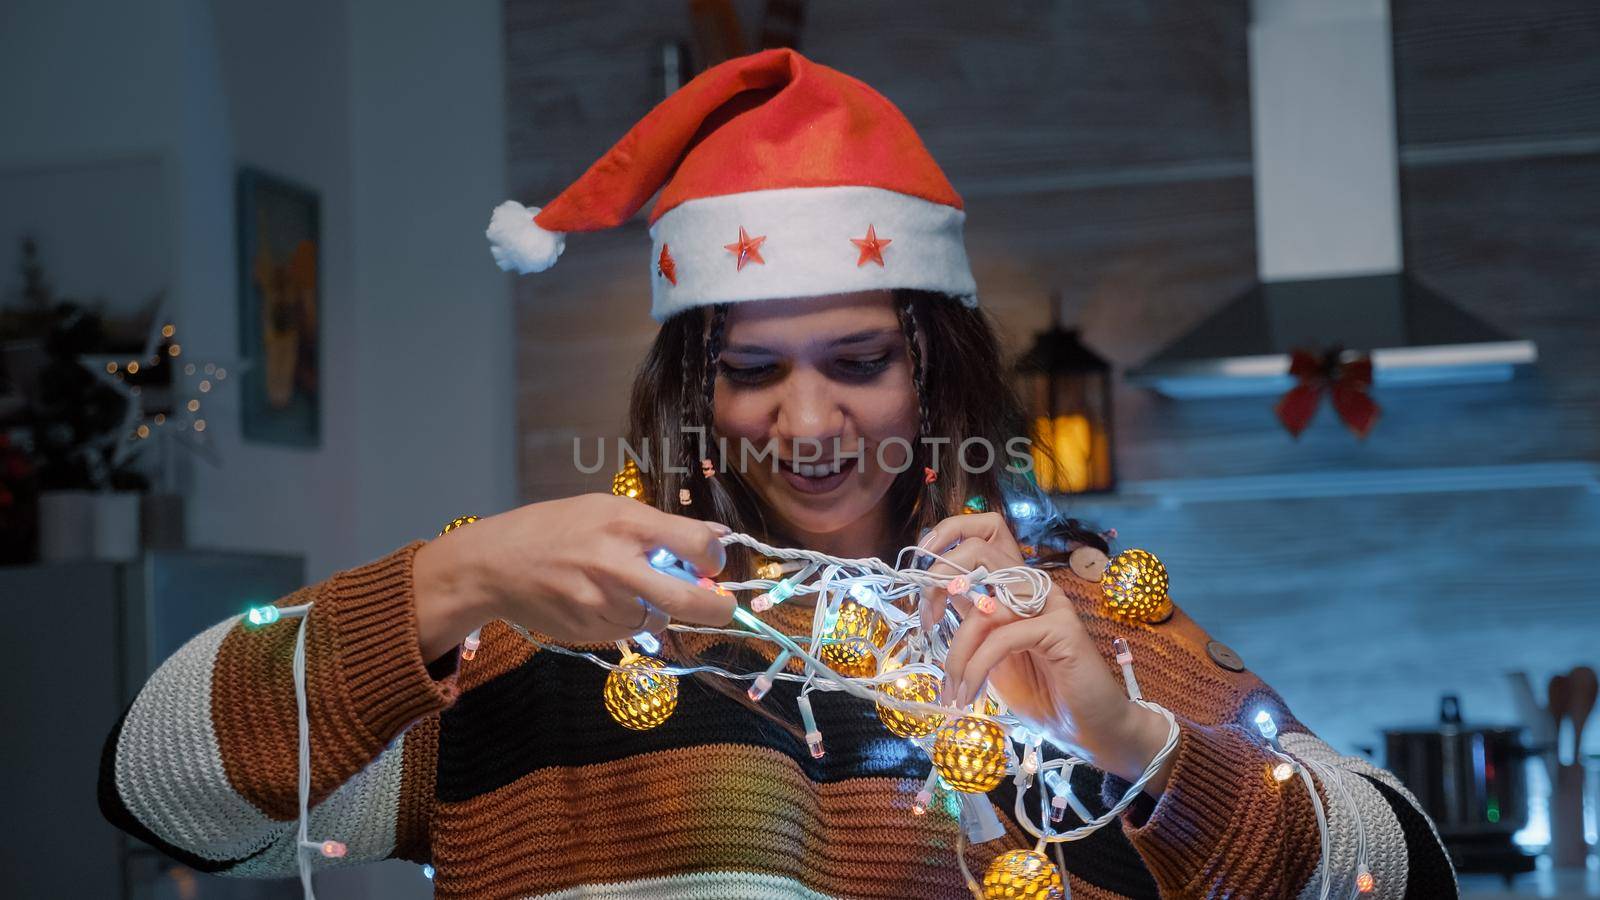 Festive woman with santa hat trying to untangle lights while decorating kitchen for christmas eve festivity. Young adult holding knotted garland for tree and preparing for dinner celebration